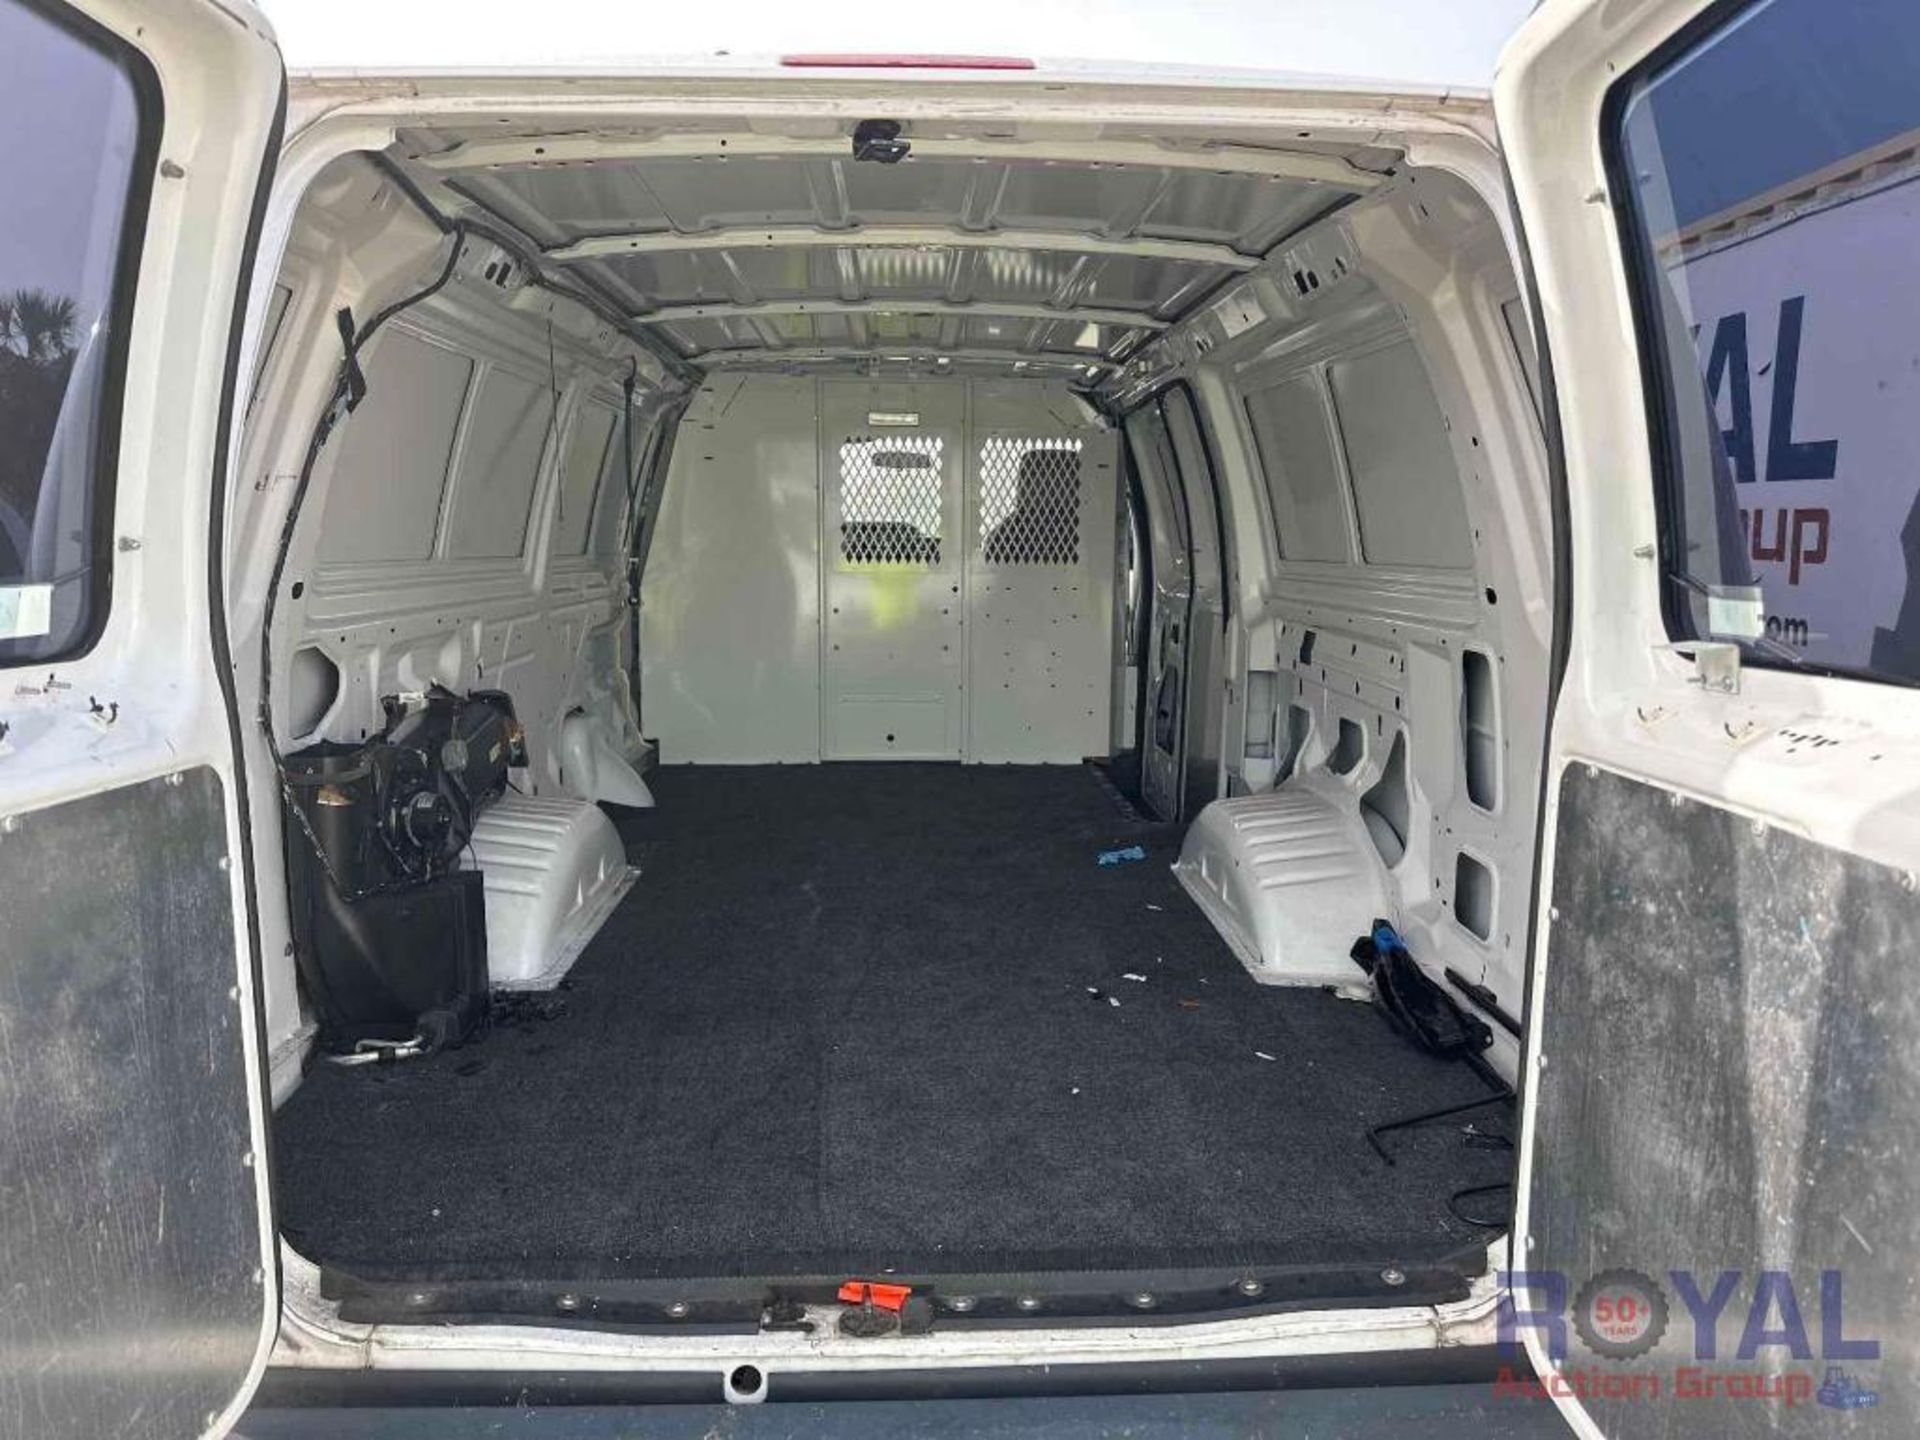 2011 Ford E350 Cargo Van - Image 19 of 27